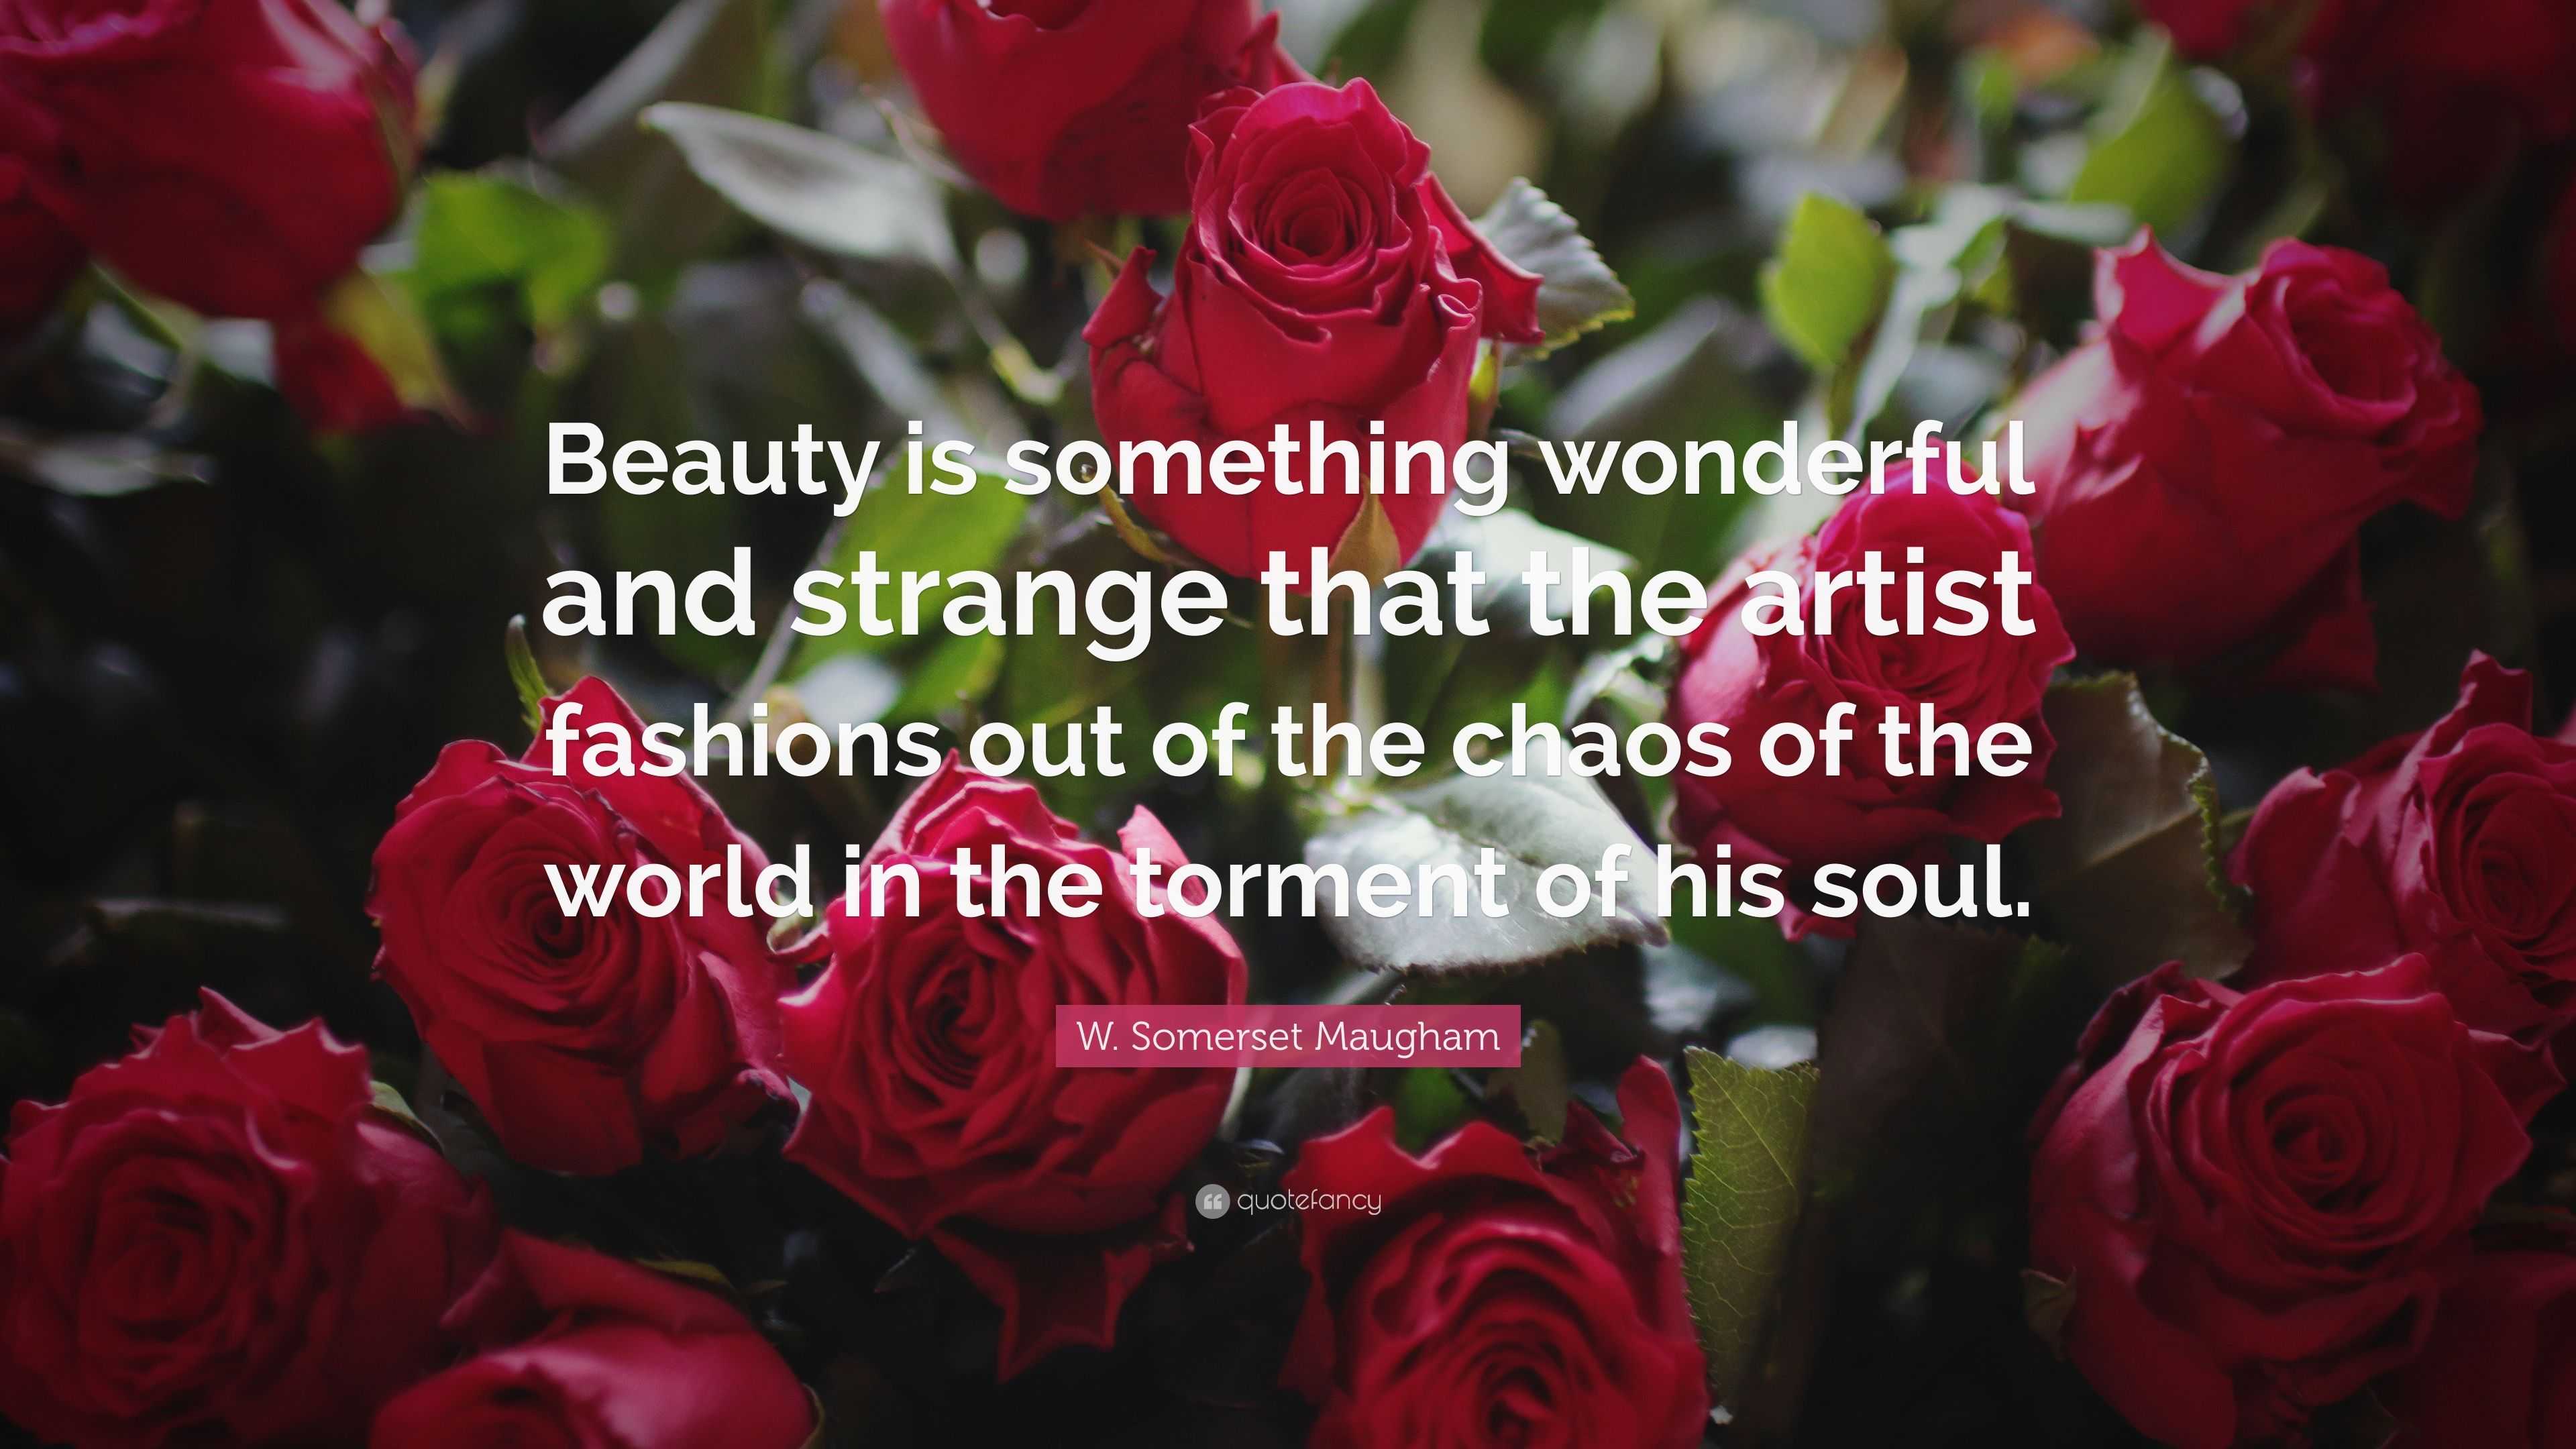 W. Somerset Maugham Quote: “Beauty is something wonderful and strange ...